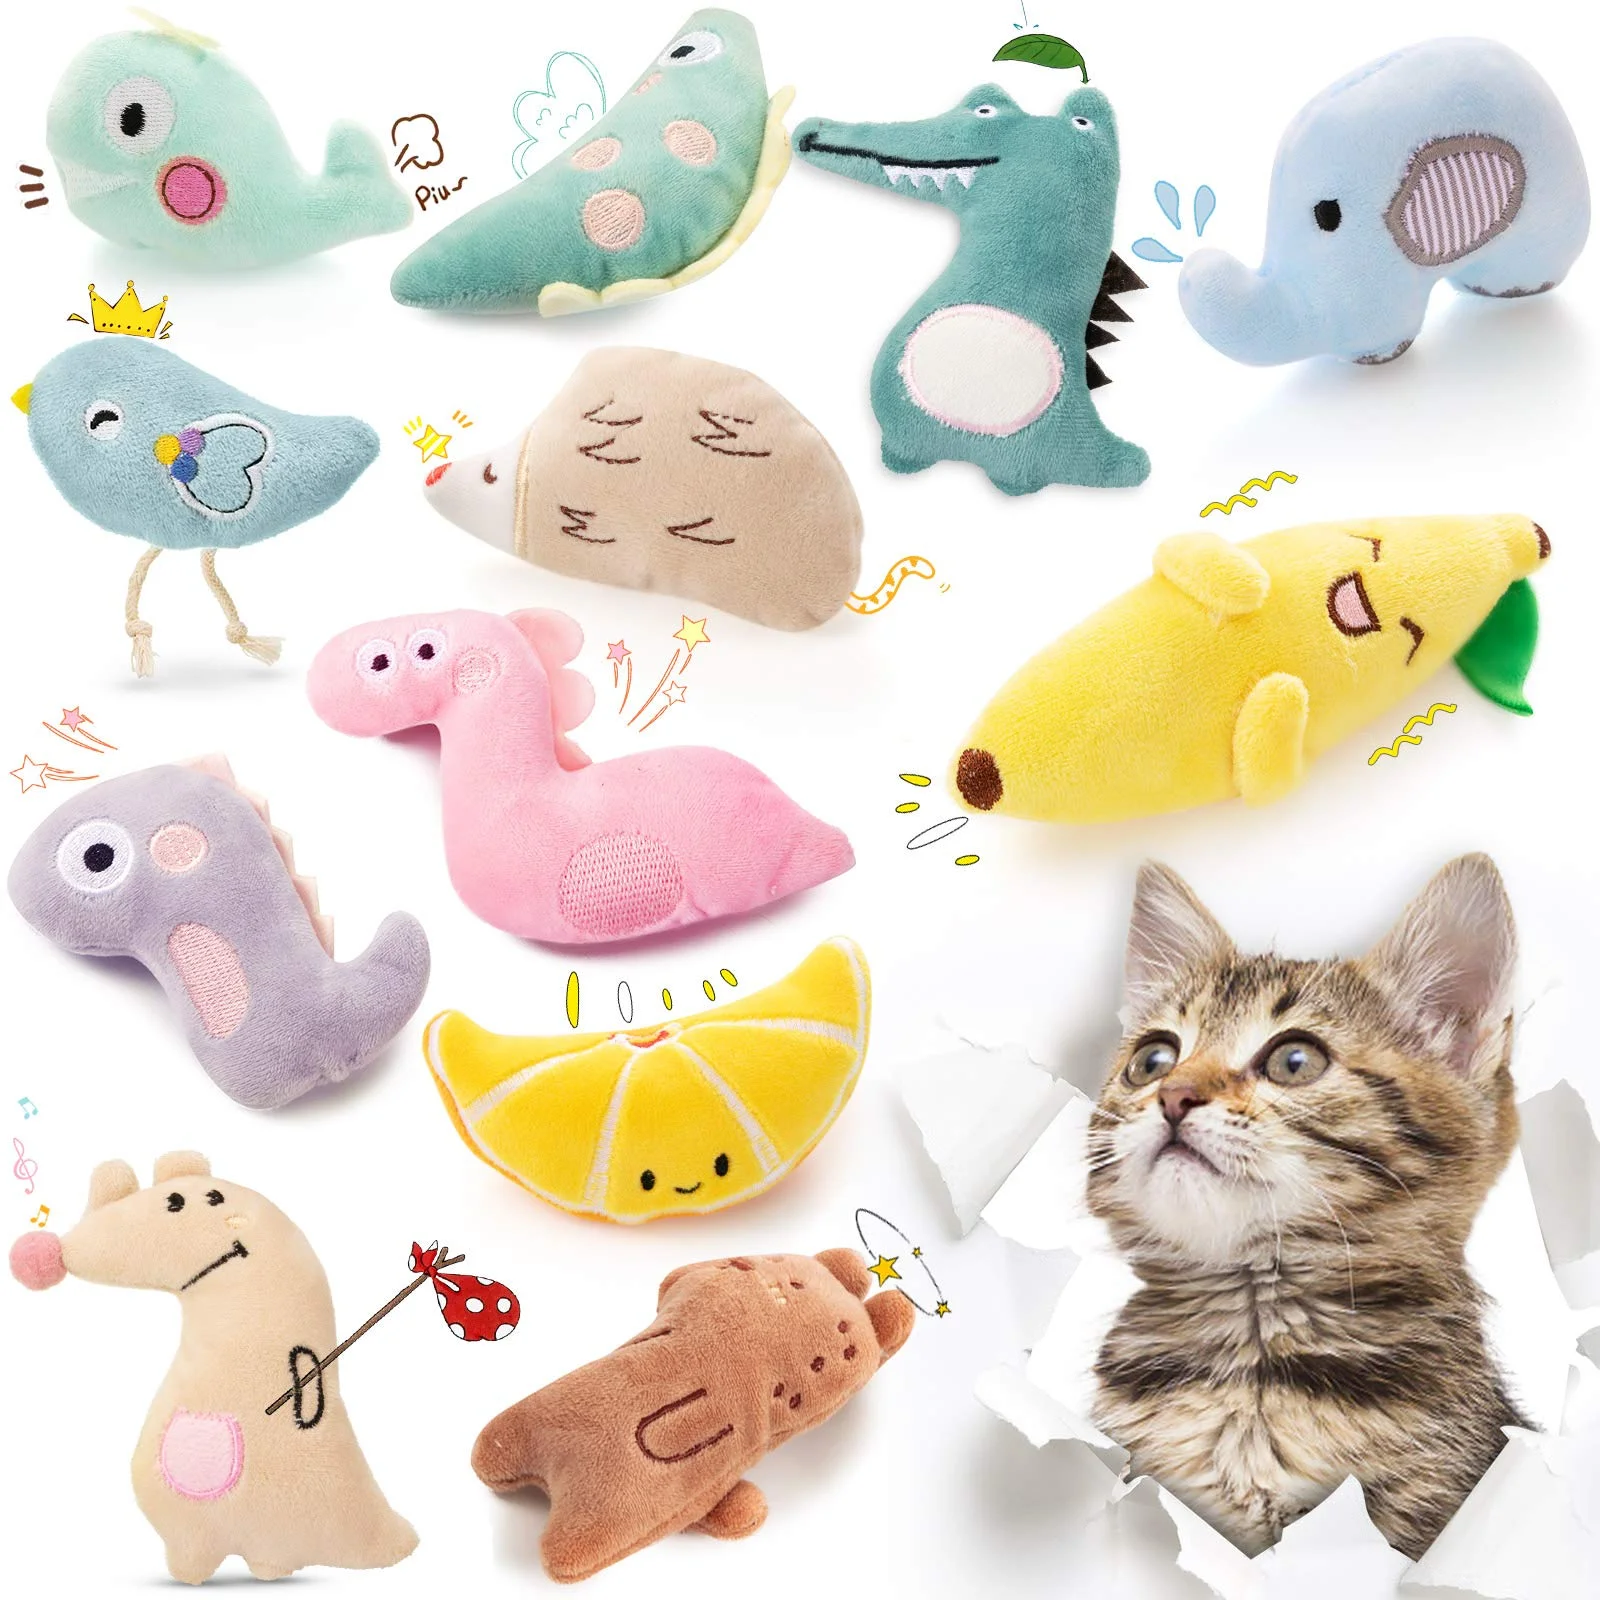 

Cat Toy Catnip Interactive Plush Stuffed Chew Pet Toys Claw Funny Cat Mint Soft Teeth Cleaning Toy For Cat Kitten Pet Products